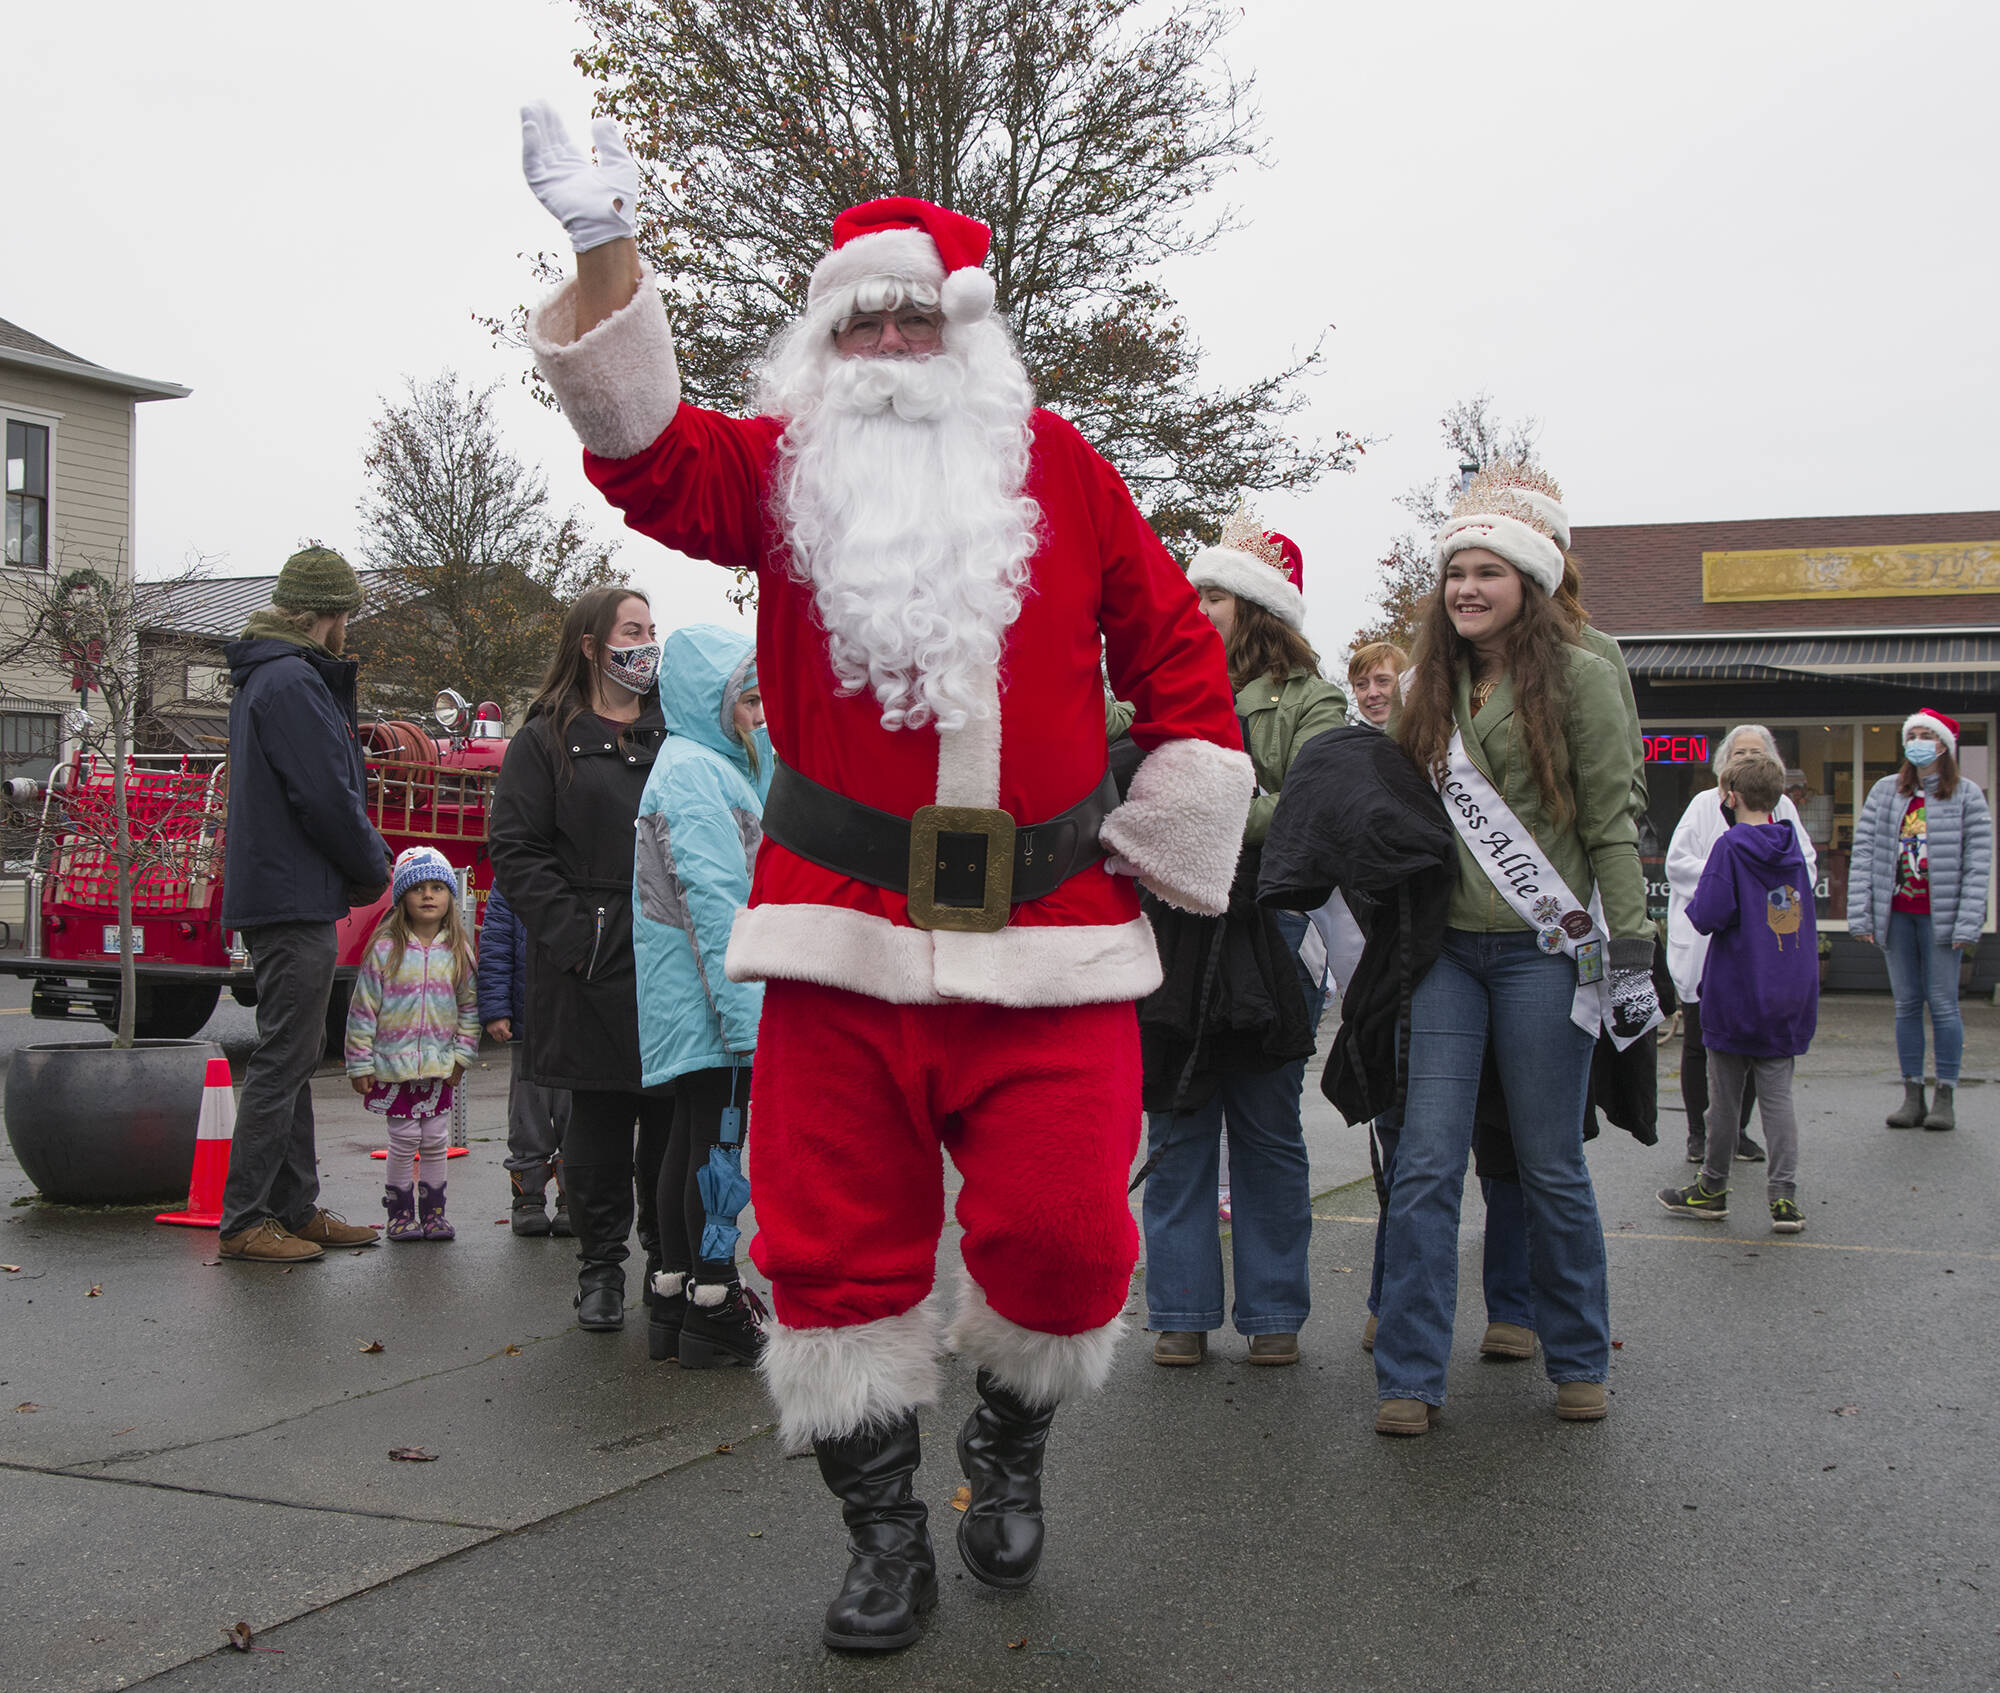 Santa, aka Stephen Rosales, waves to visitors of the Home Town Holidays event last month. Sequim Gazette photo by Emily Matthiessen